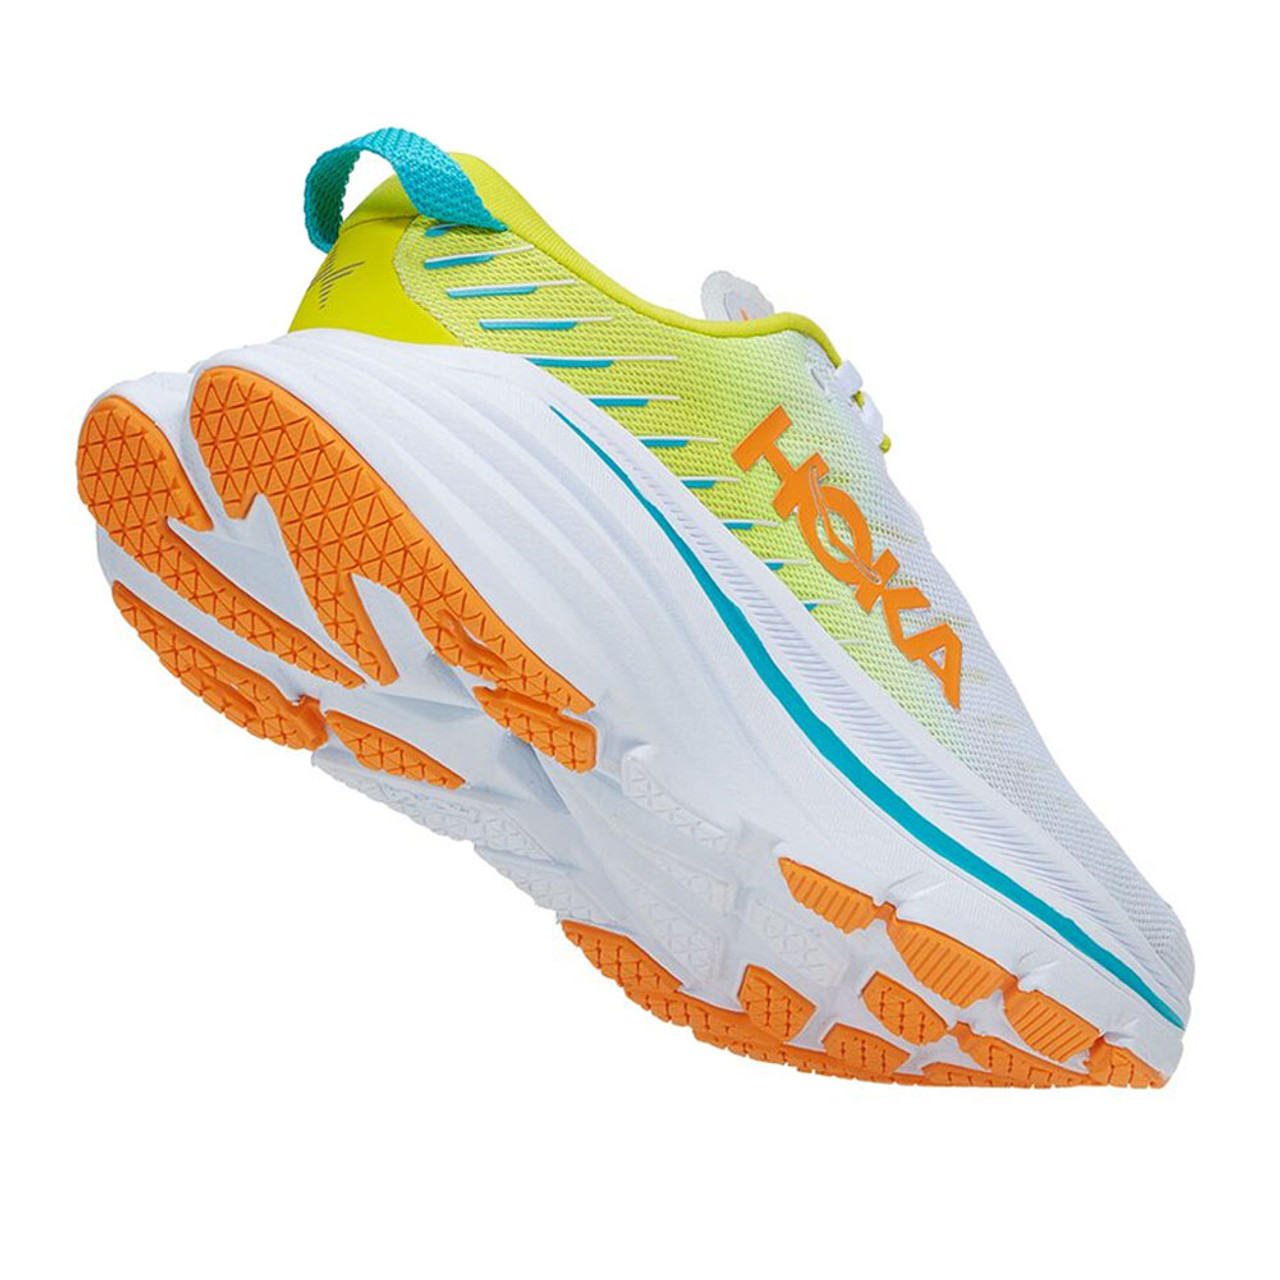 HOKA ONE ONE® Carbon X for Women